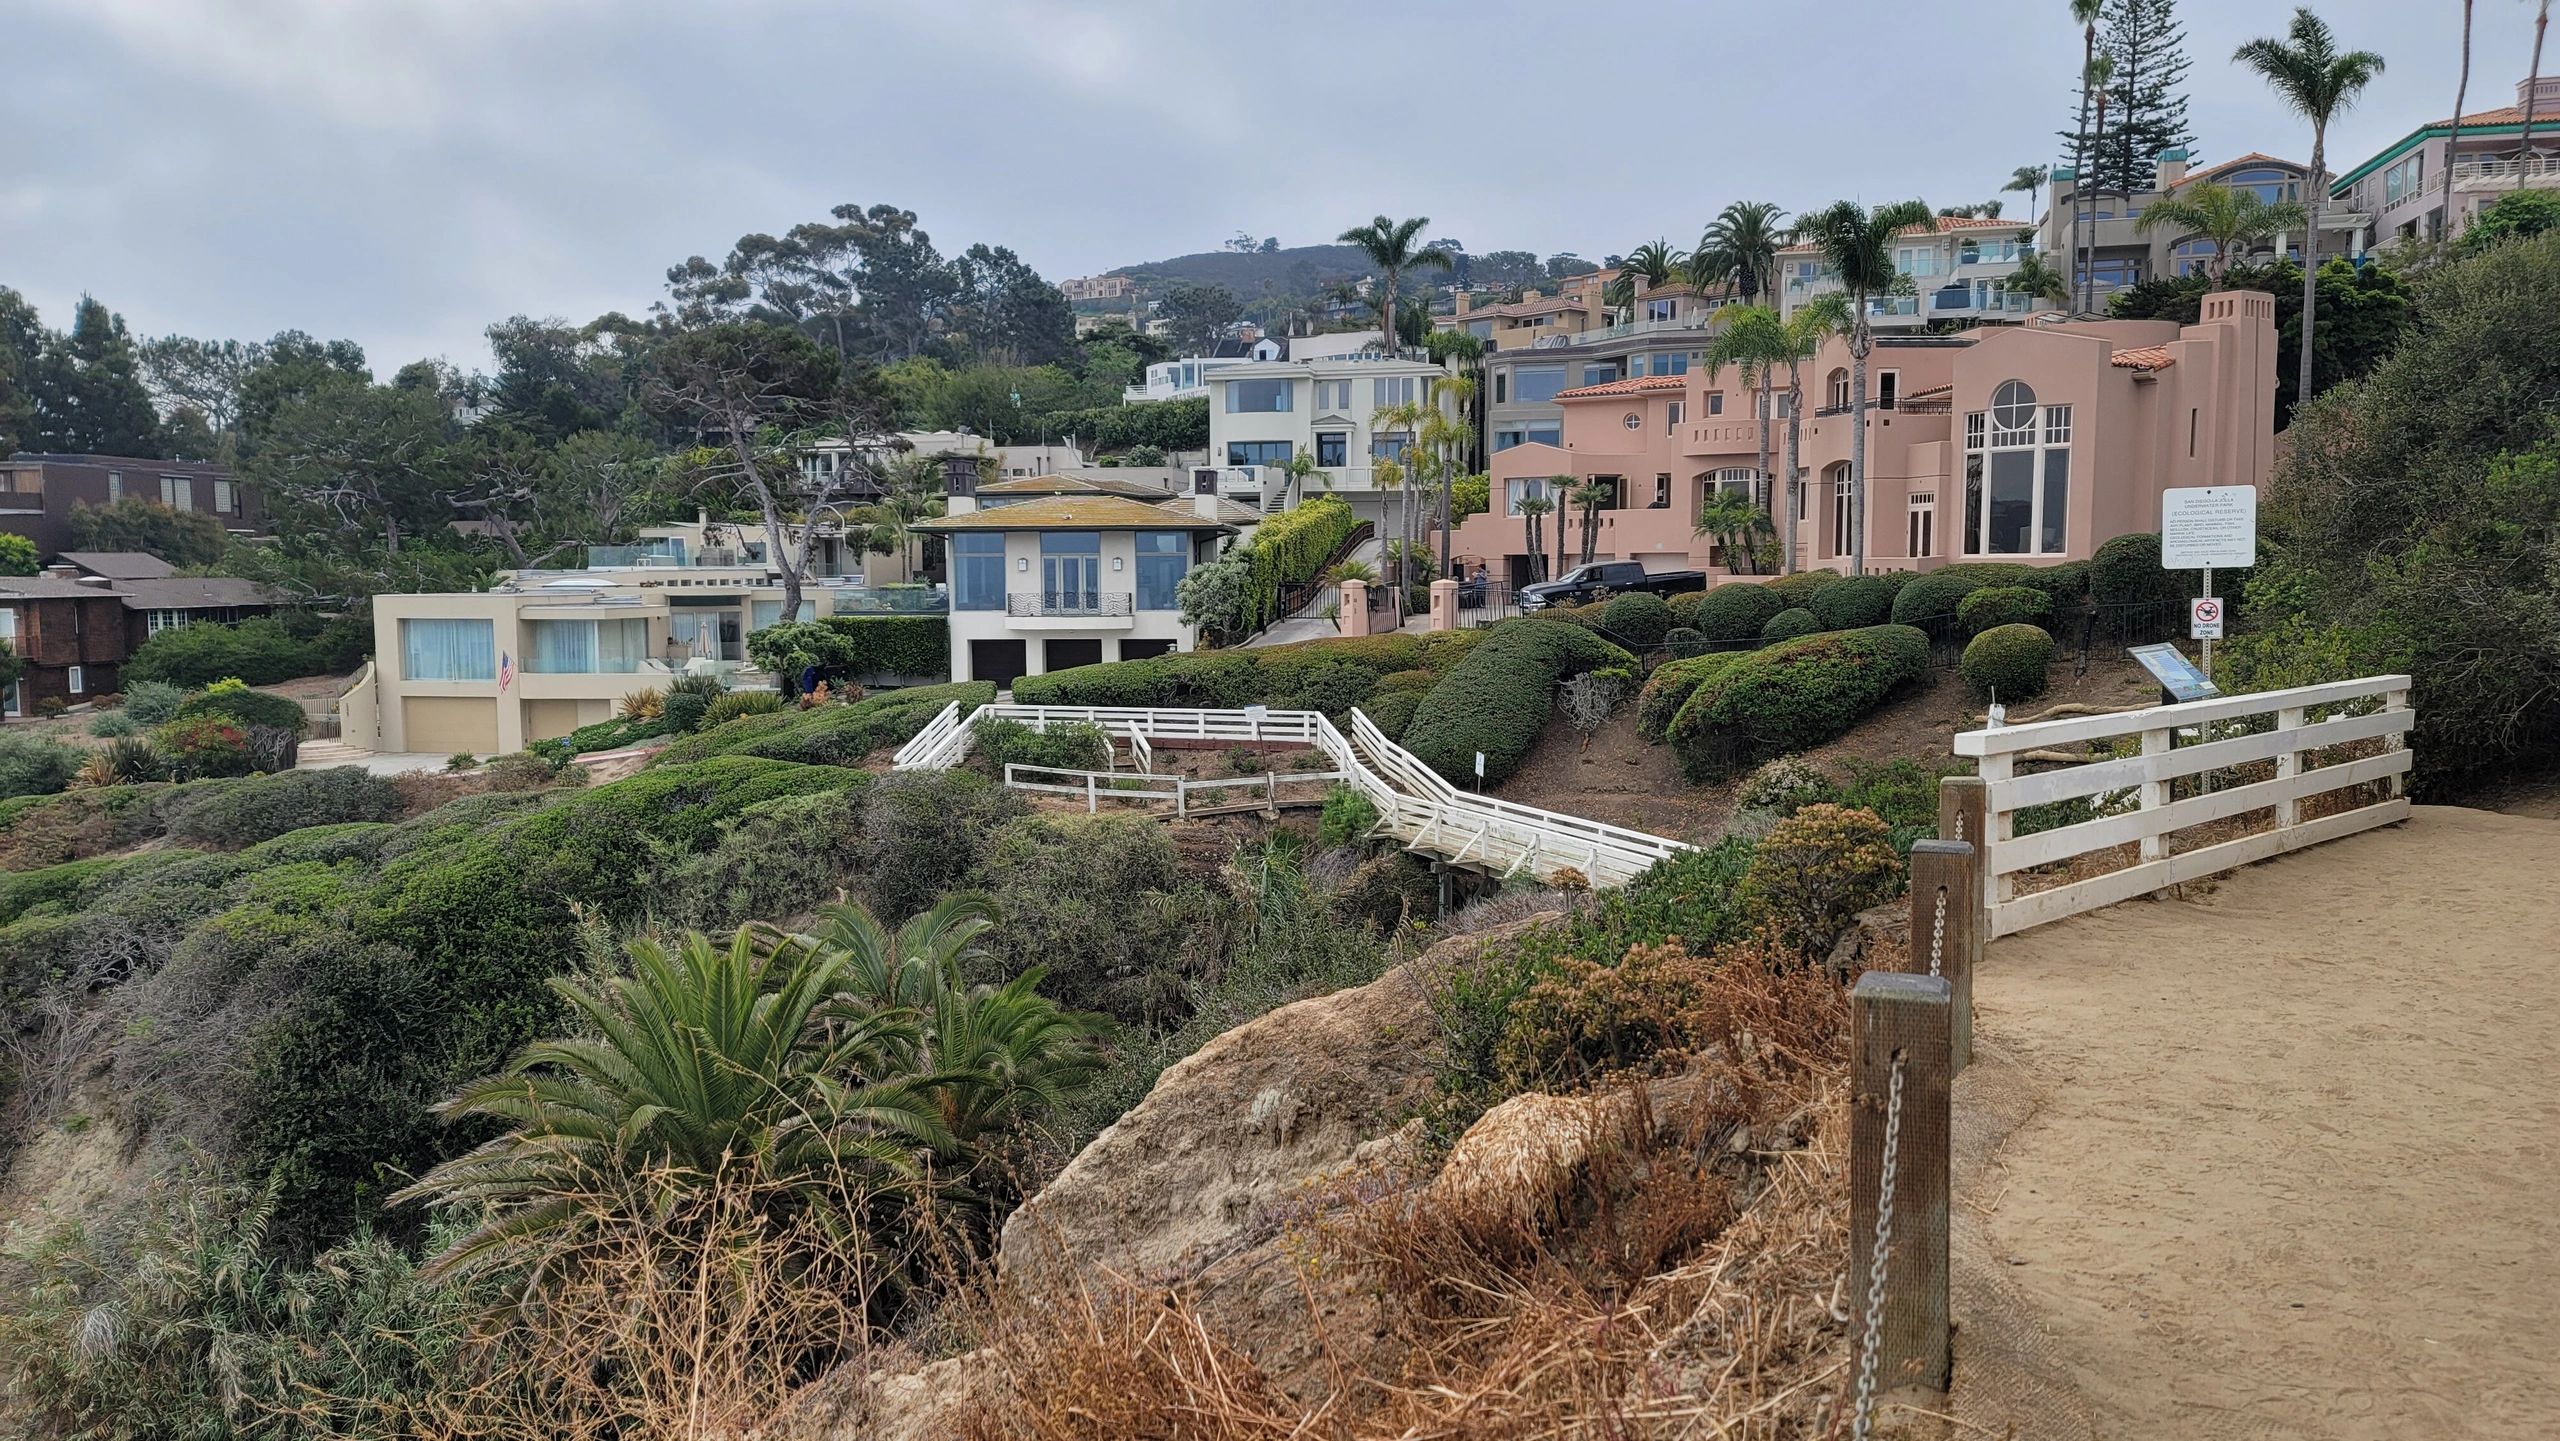 Picture of houses in La Jolla